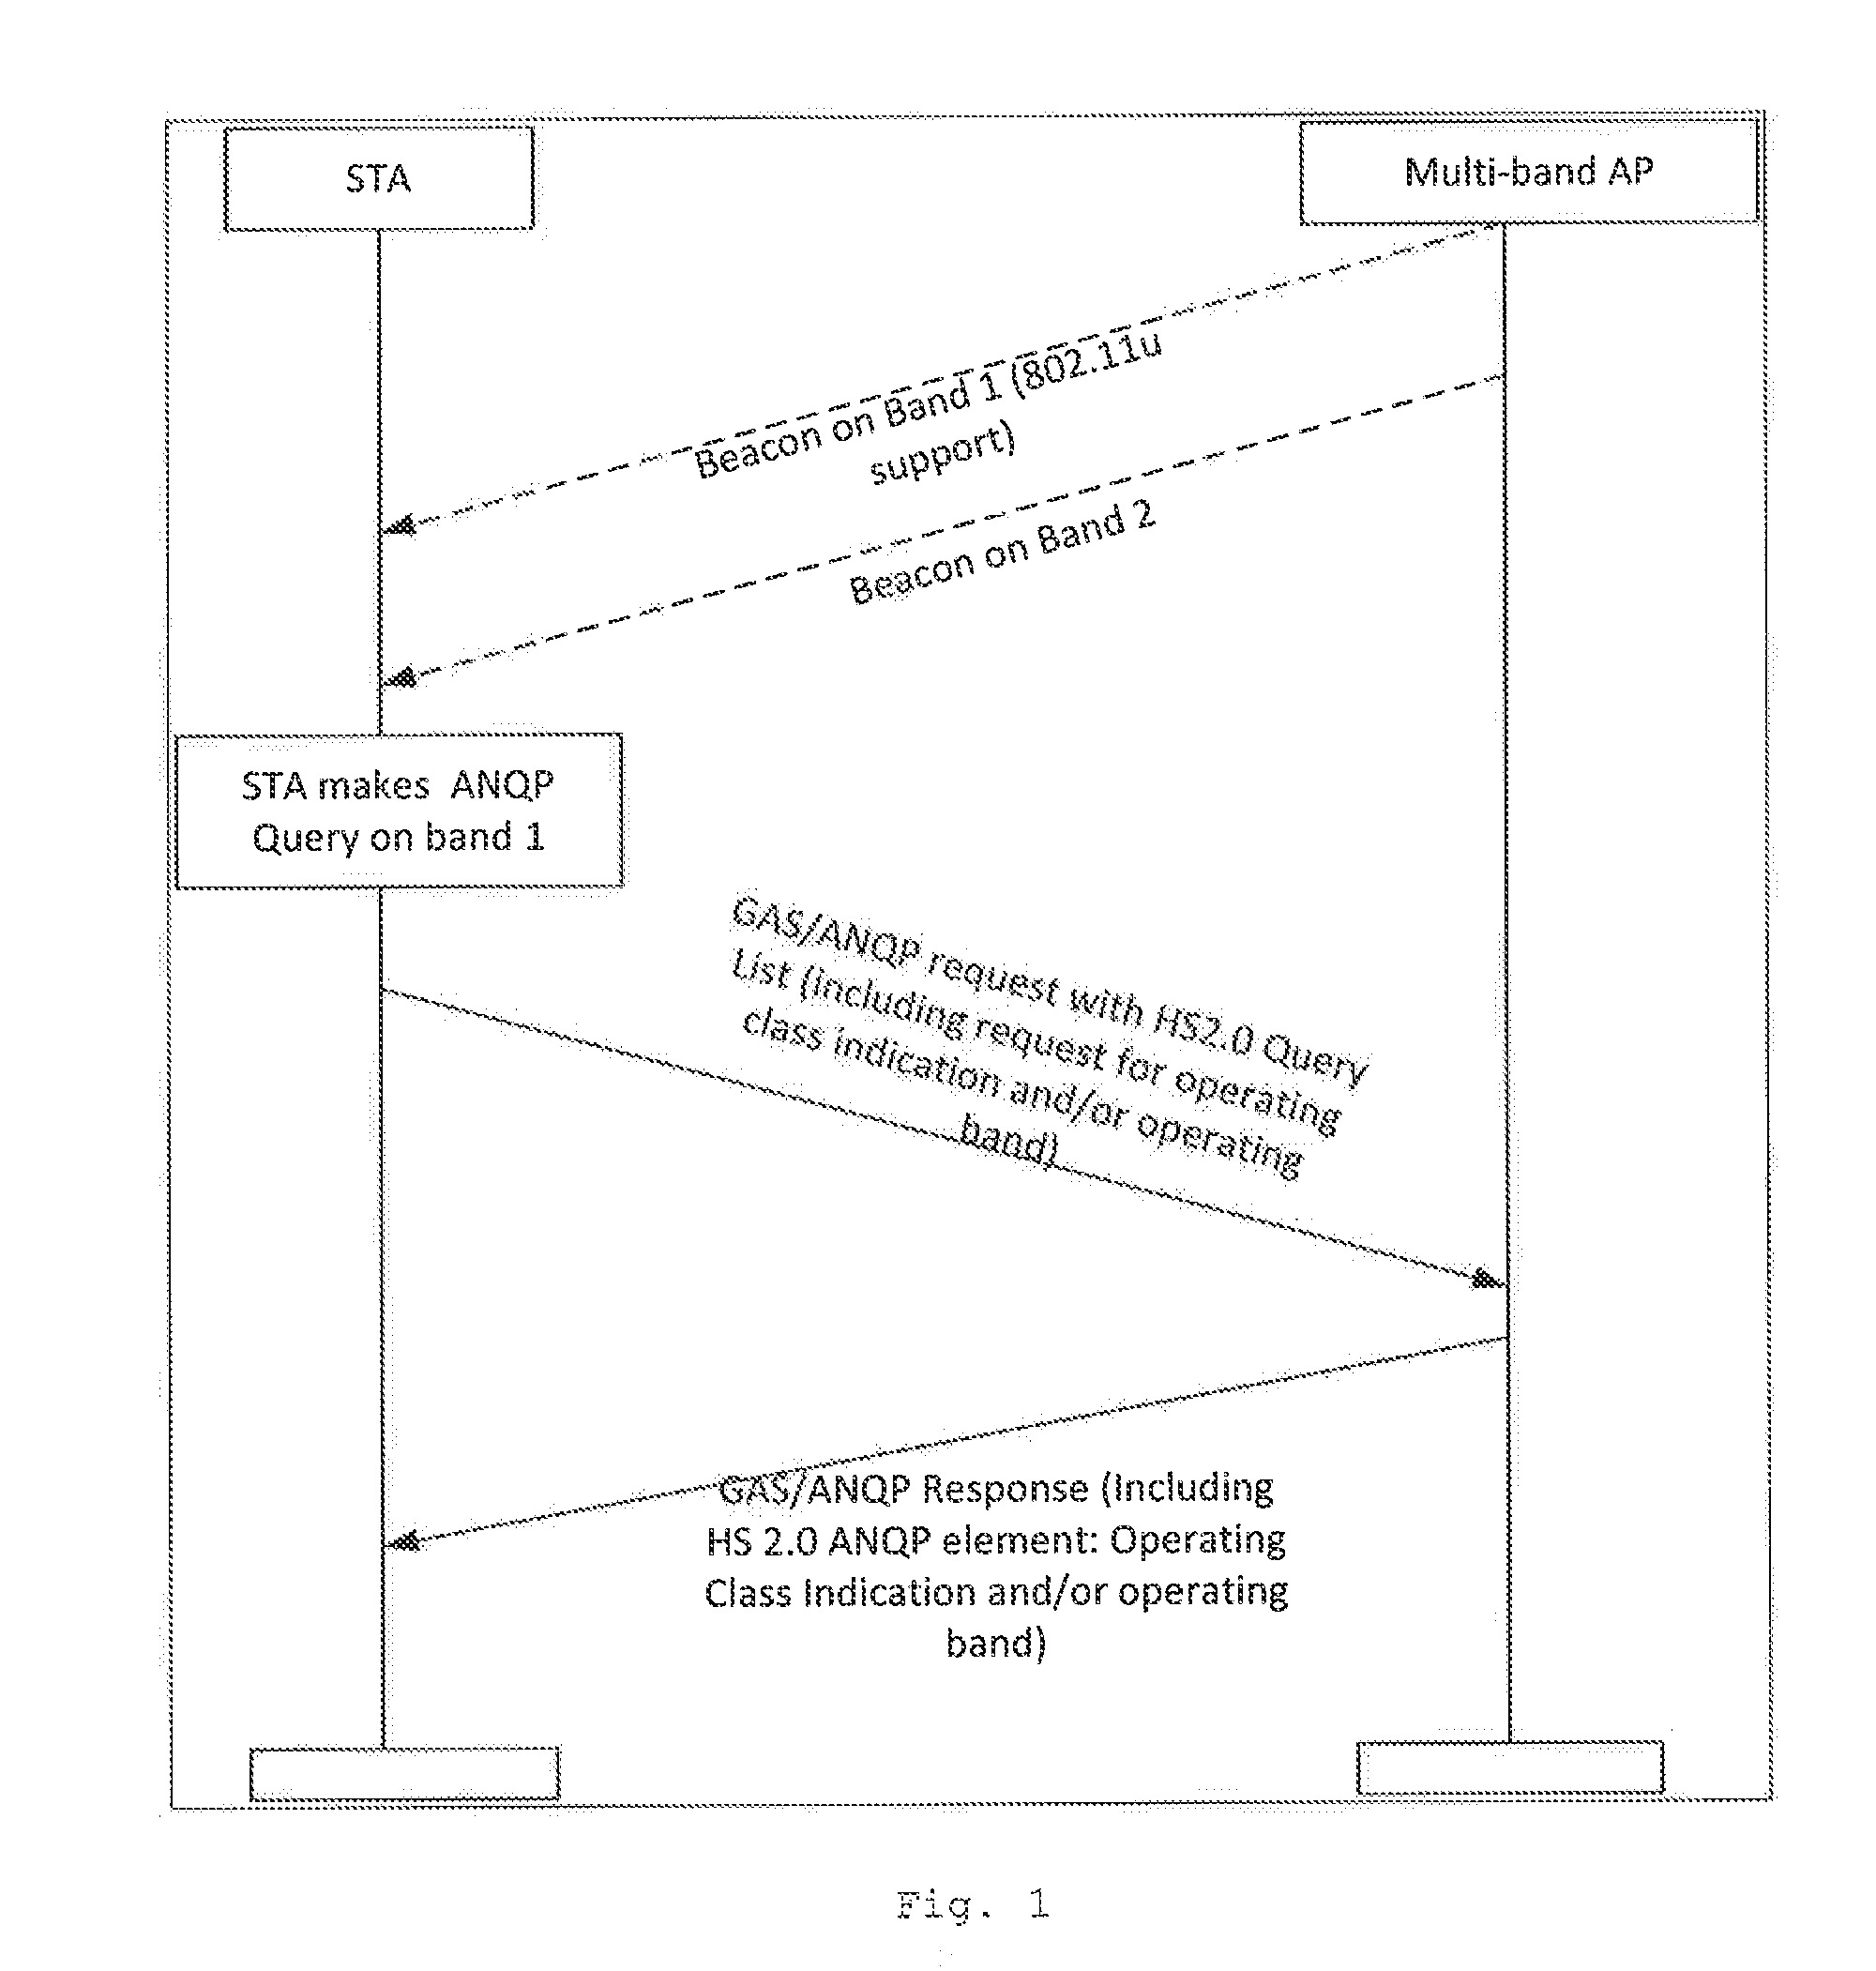 Operating band support for a wireless local area network